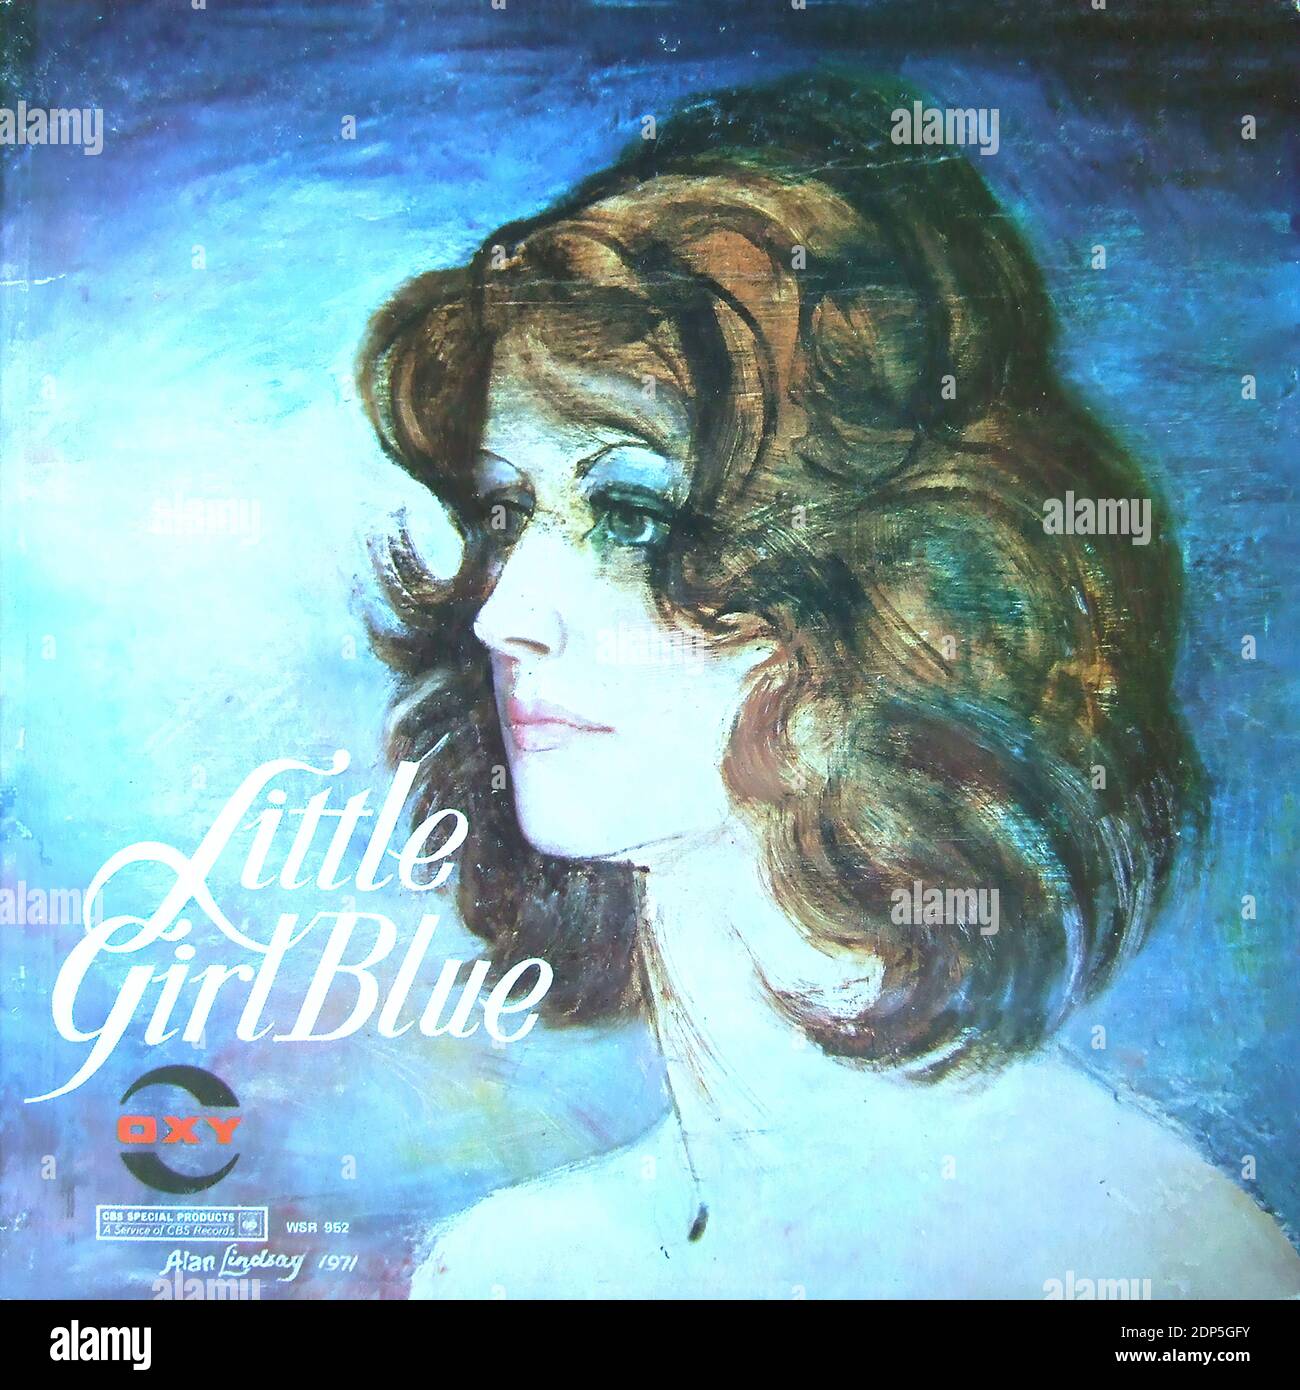 Little Girl Blue - OXY - CBS Special Products WSR 952 - Vintage vinyl album cover Stock Photo